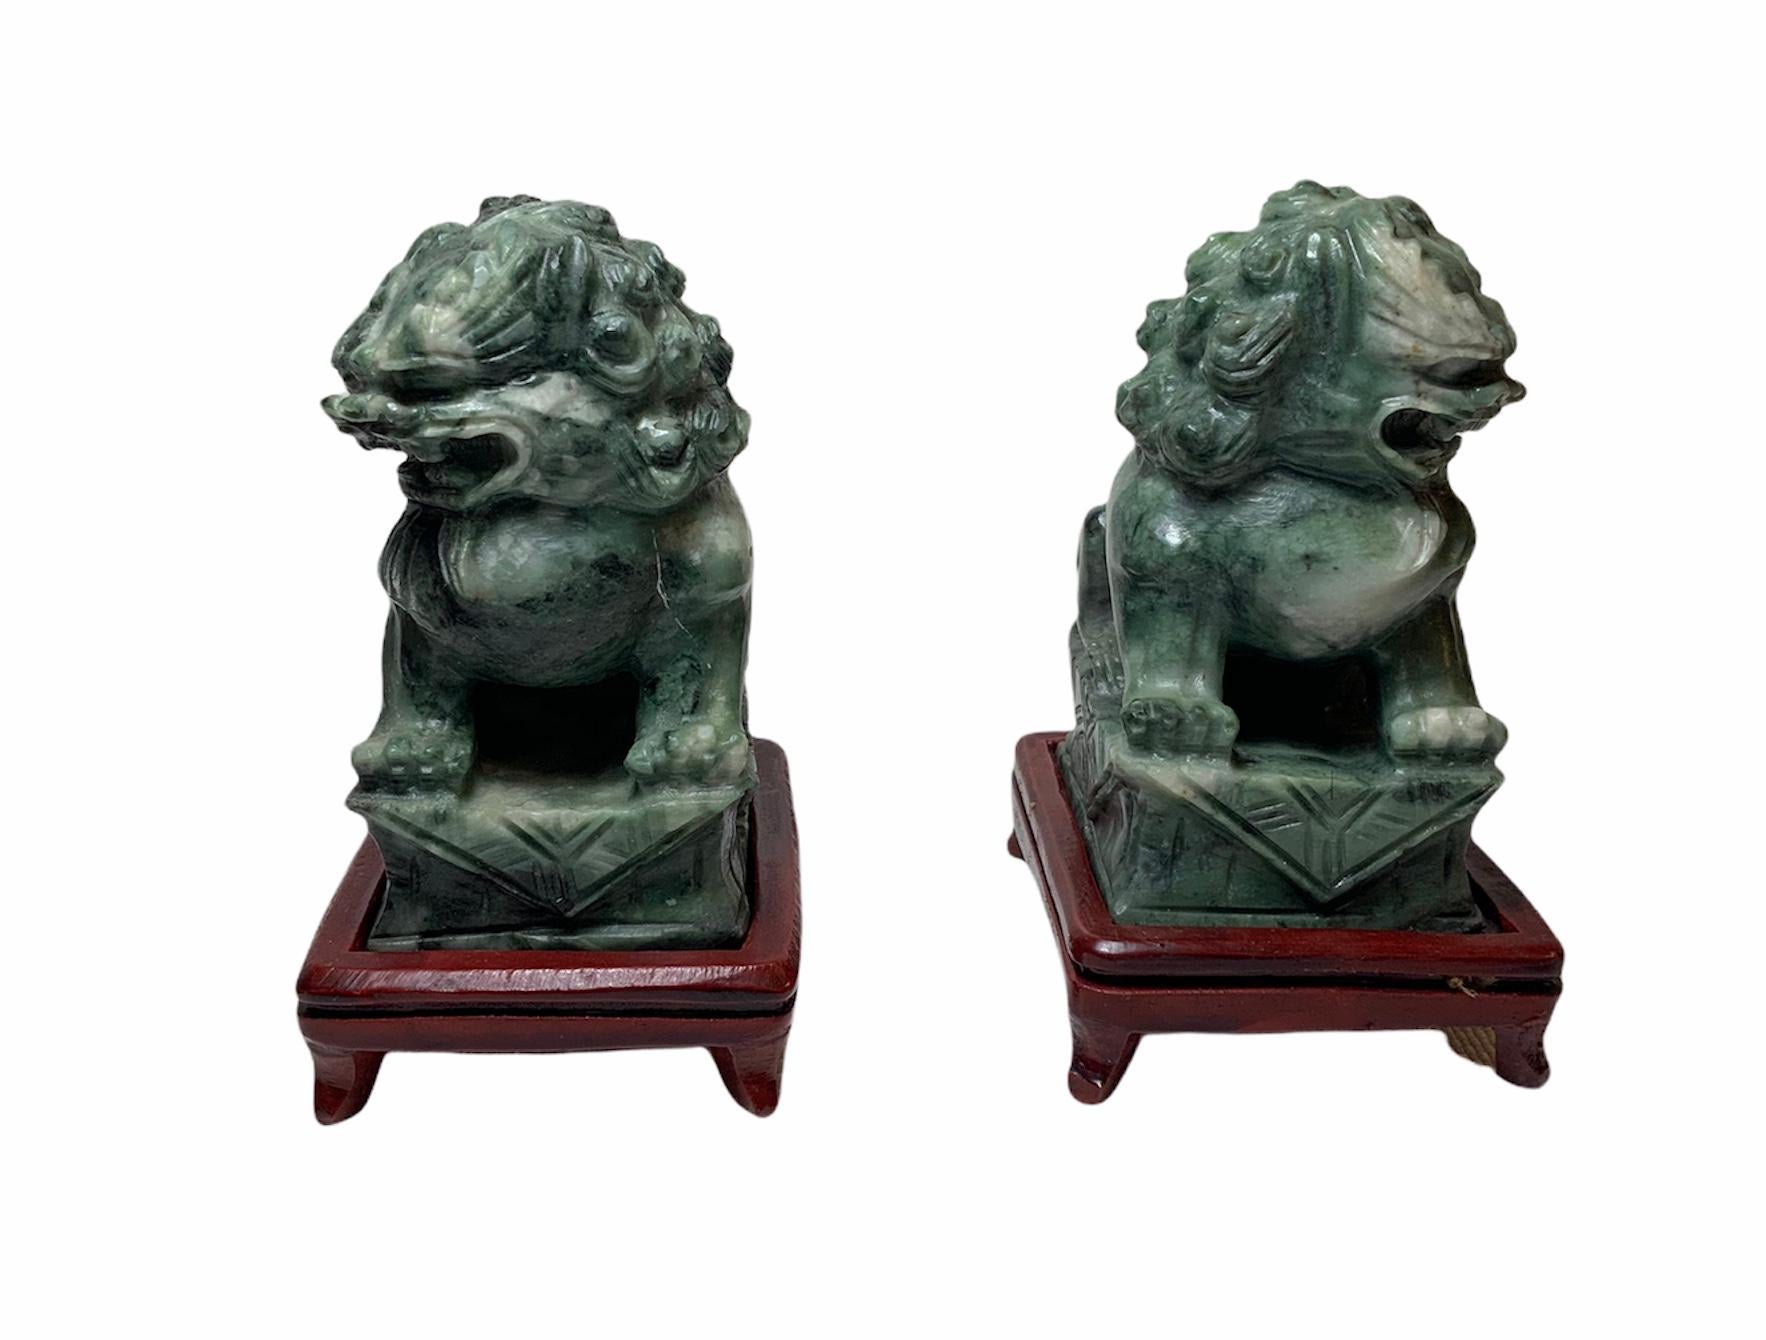 This is a pair of hand carved green stone Chinese Foo-Dog sculptures/figurines. They depict a pair of foo-dogs seated in a rectangular shaped base with a carpet. They are supported by a dark red wood bases with scroll feet.